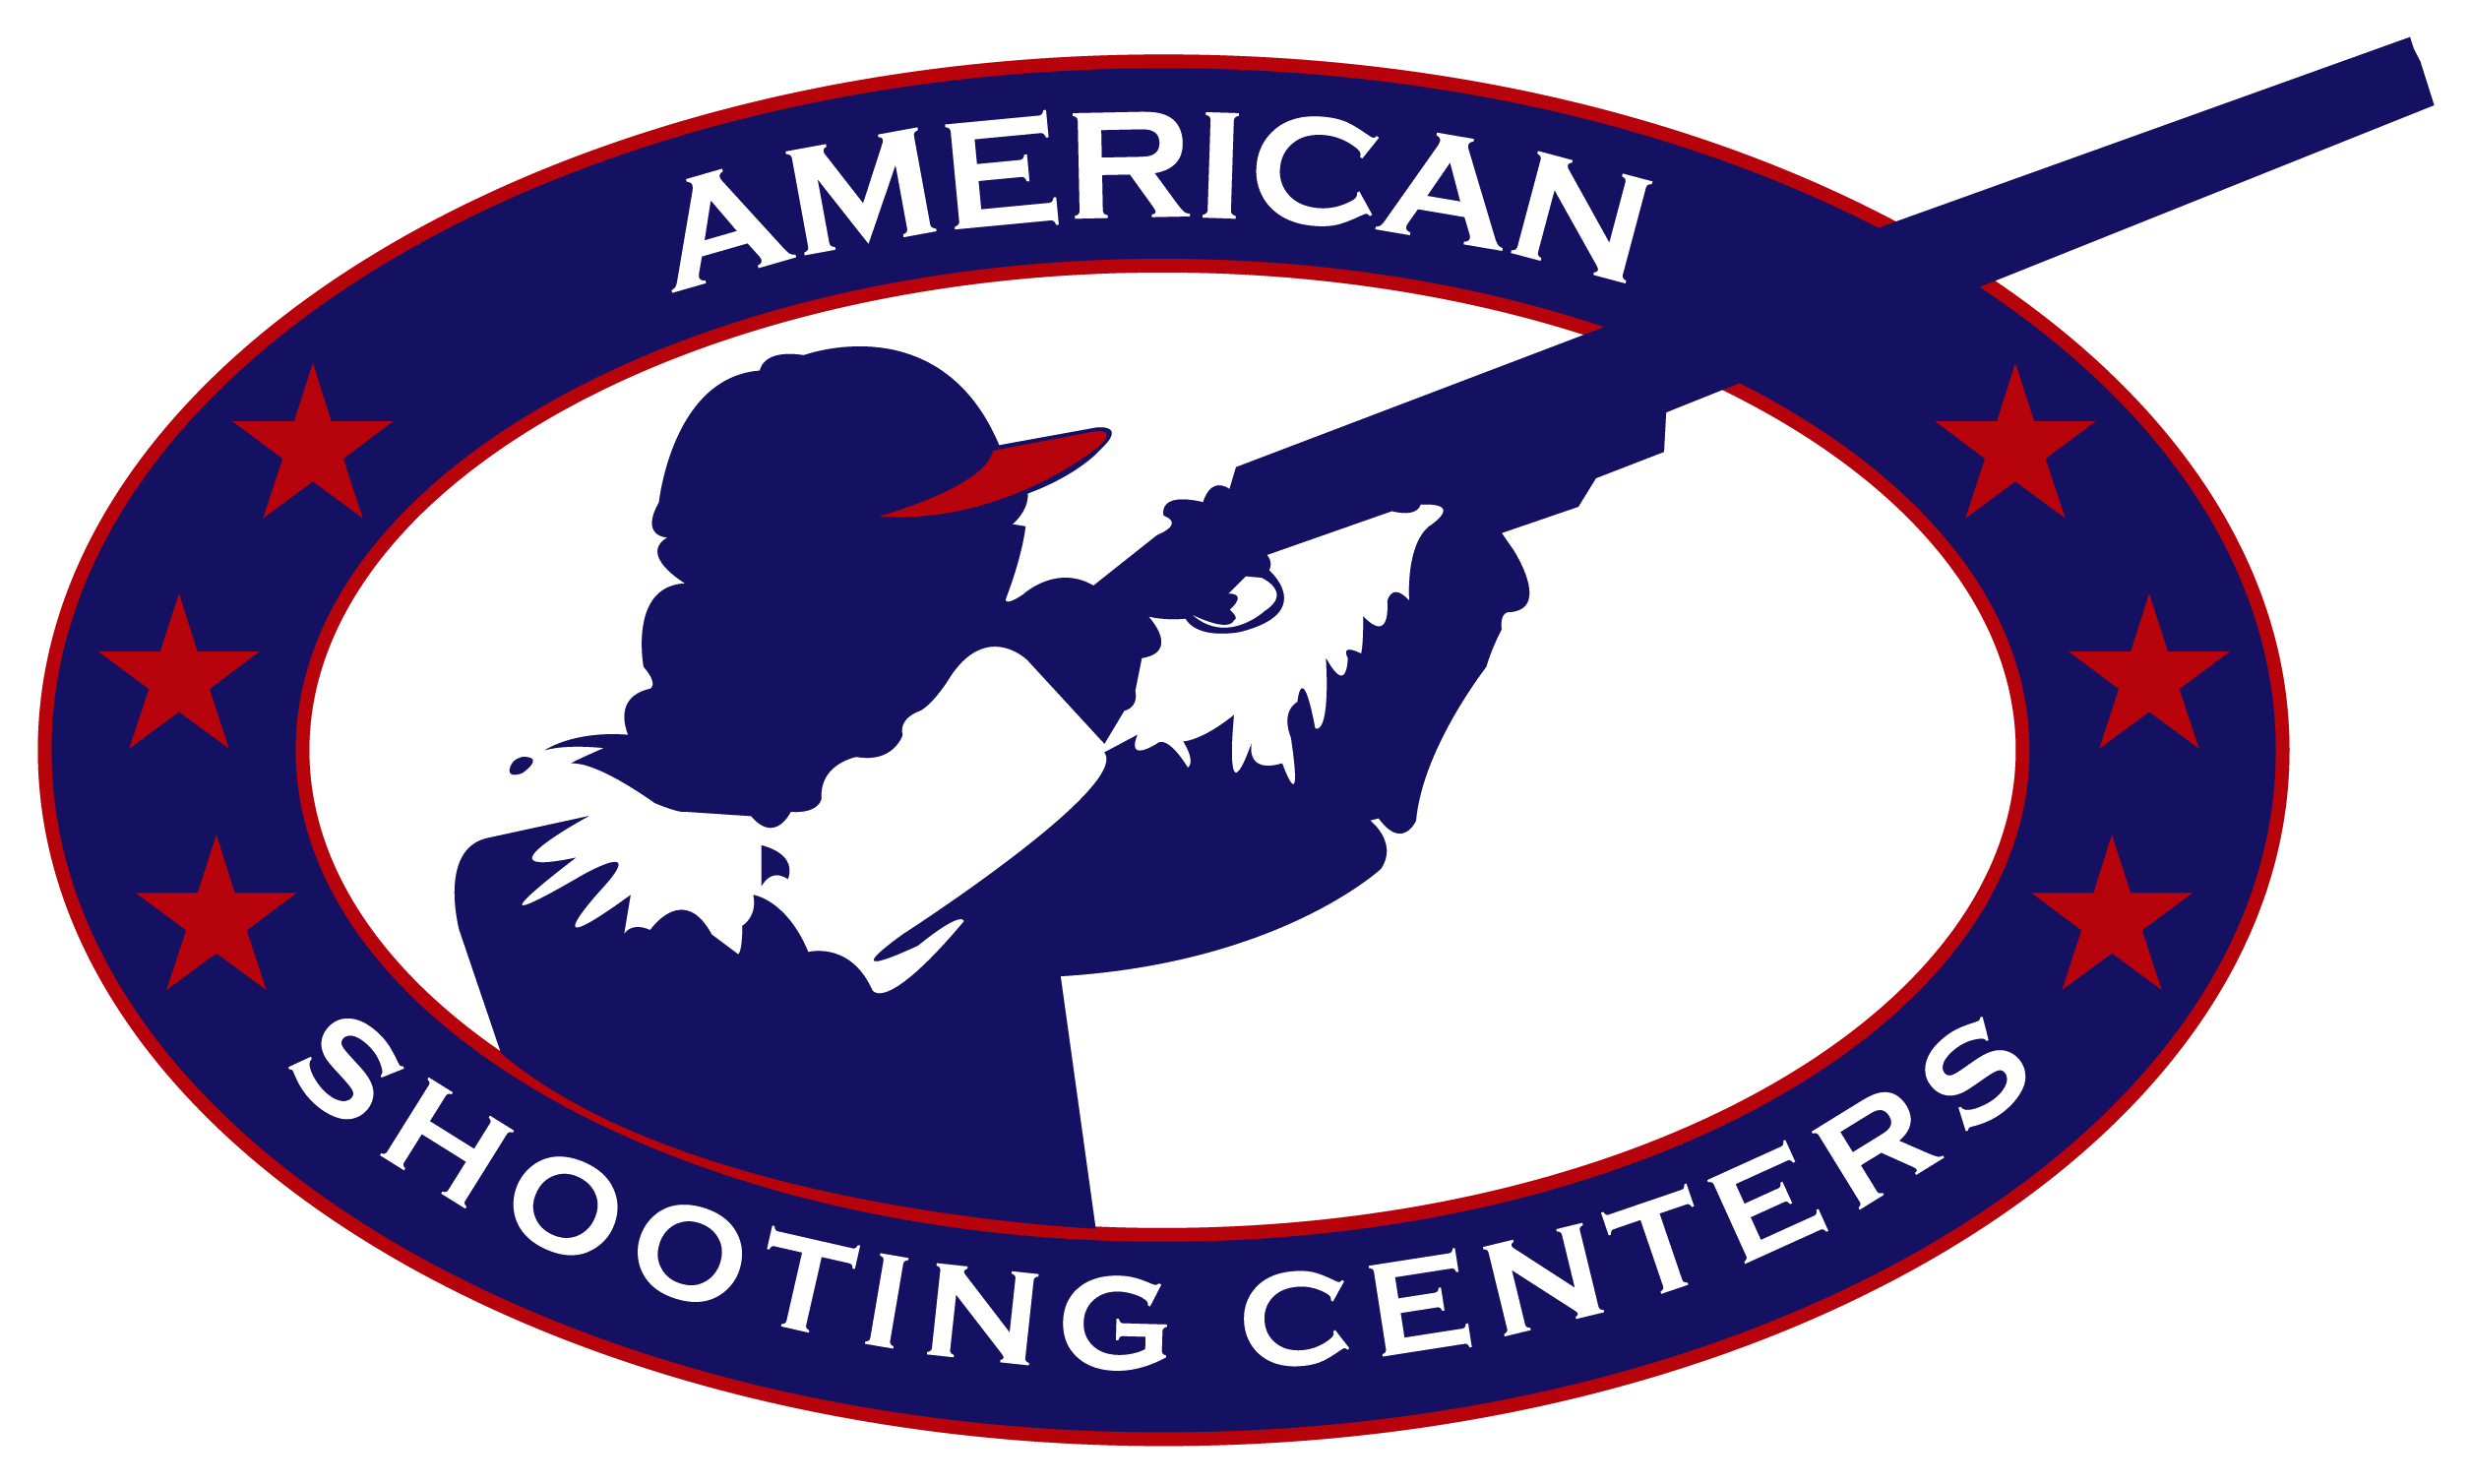 Fiocchi Logo - FIOCCHI AND NSSF FIRST SHOT NSCA EVENT | American Shooting Centers